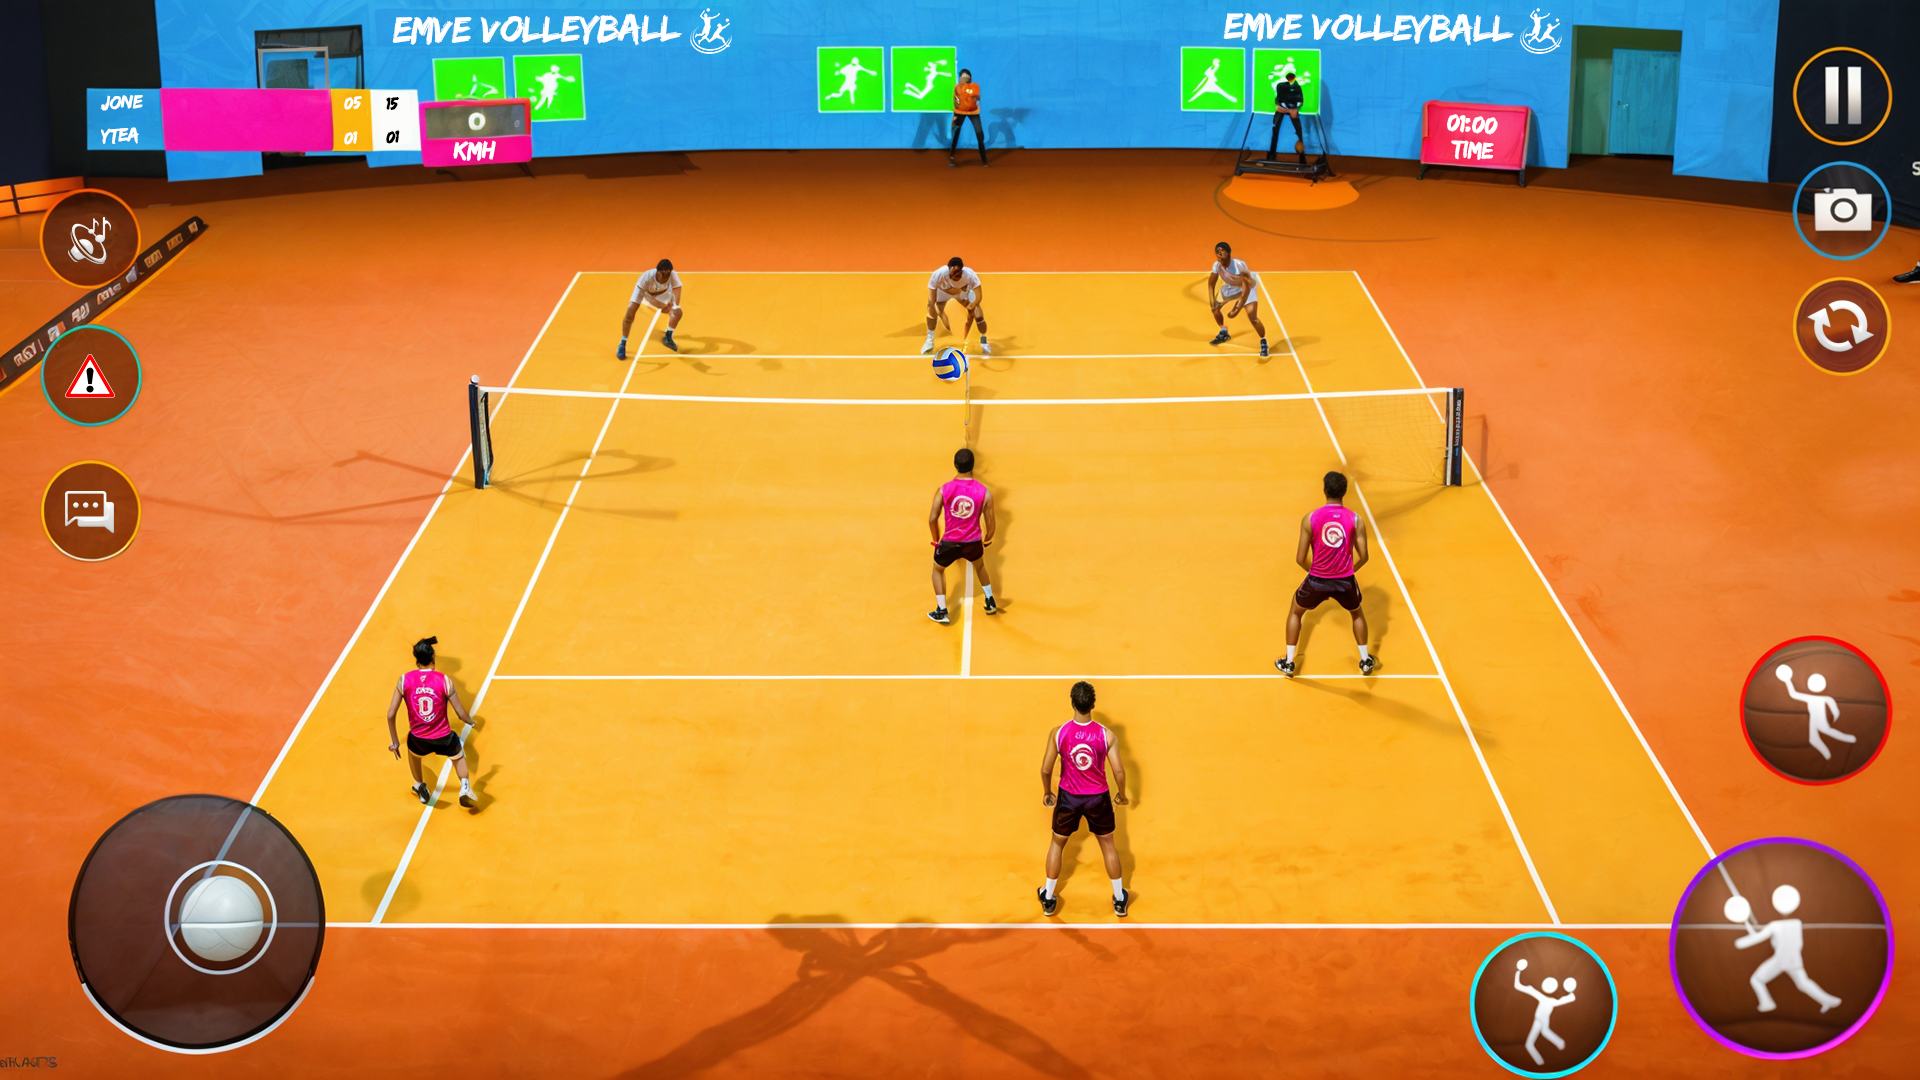 Volleyball Games Arena screenshot game